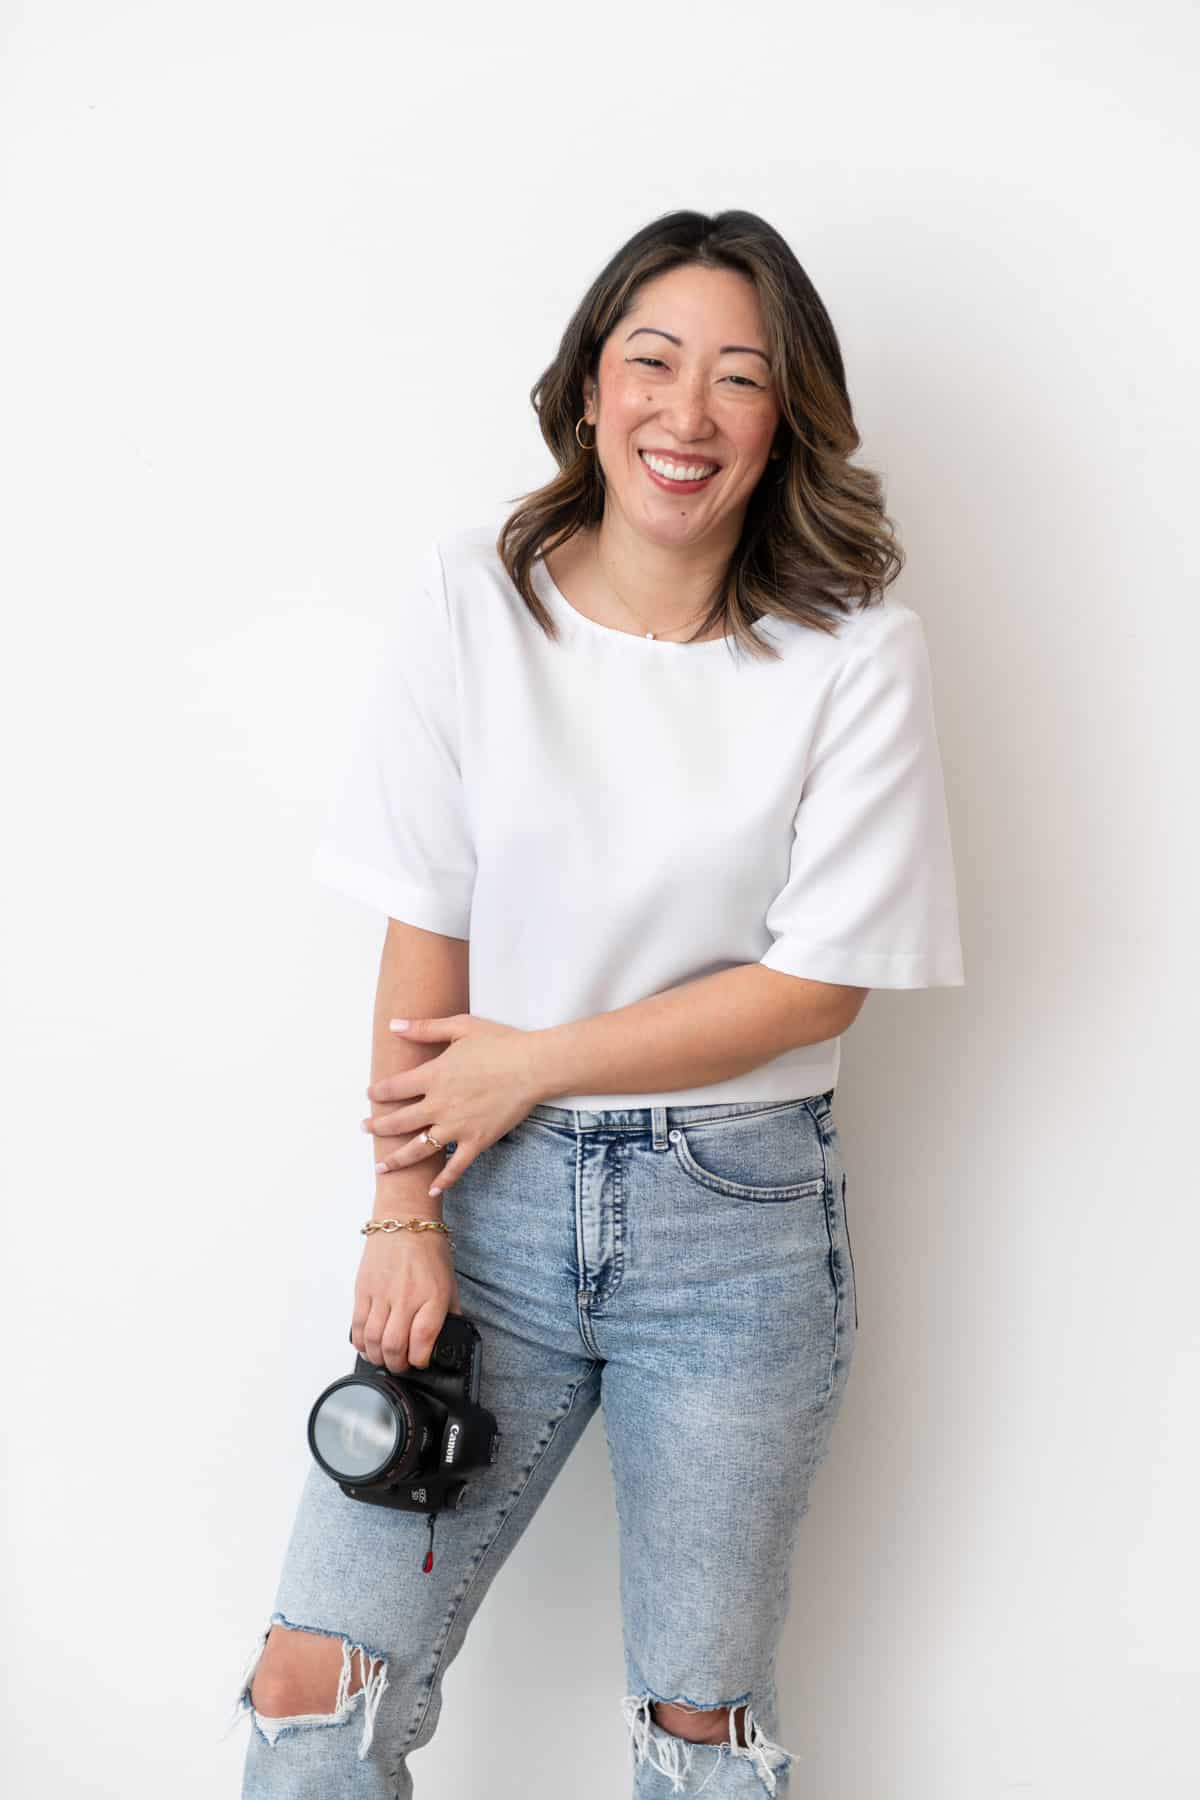 Julie Chiou in a white shirt and light blue jeans holding a camera touching one arm and smiling against a wall